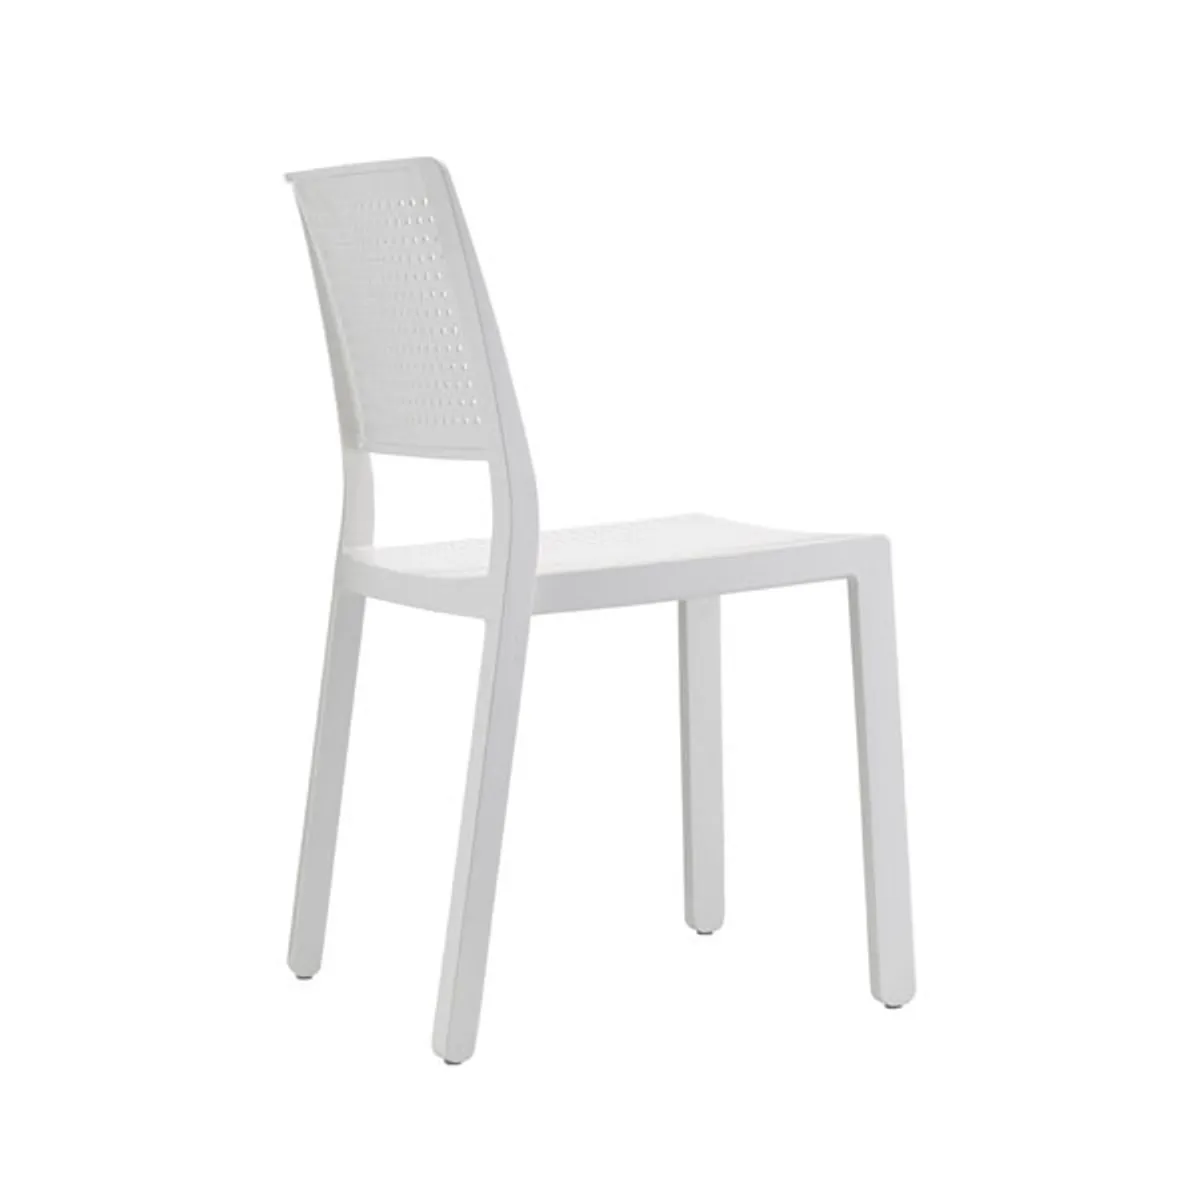 Remi dot side chair 7 Inside Out Contracts